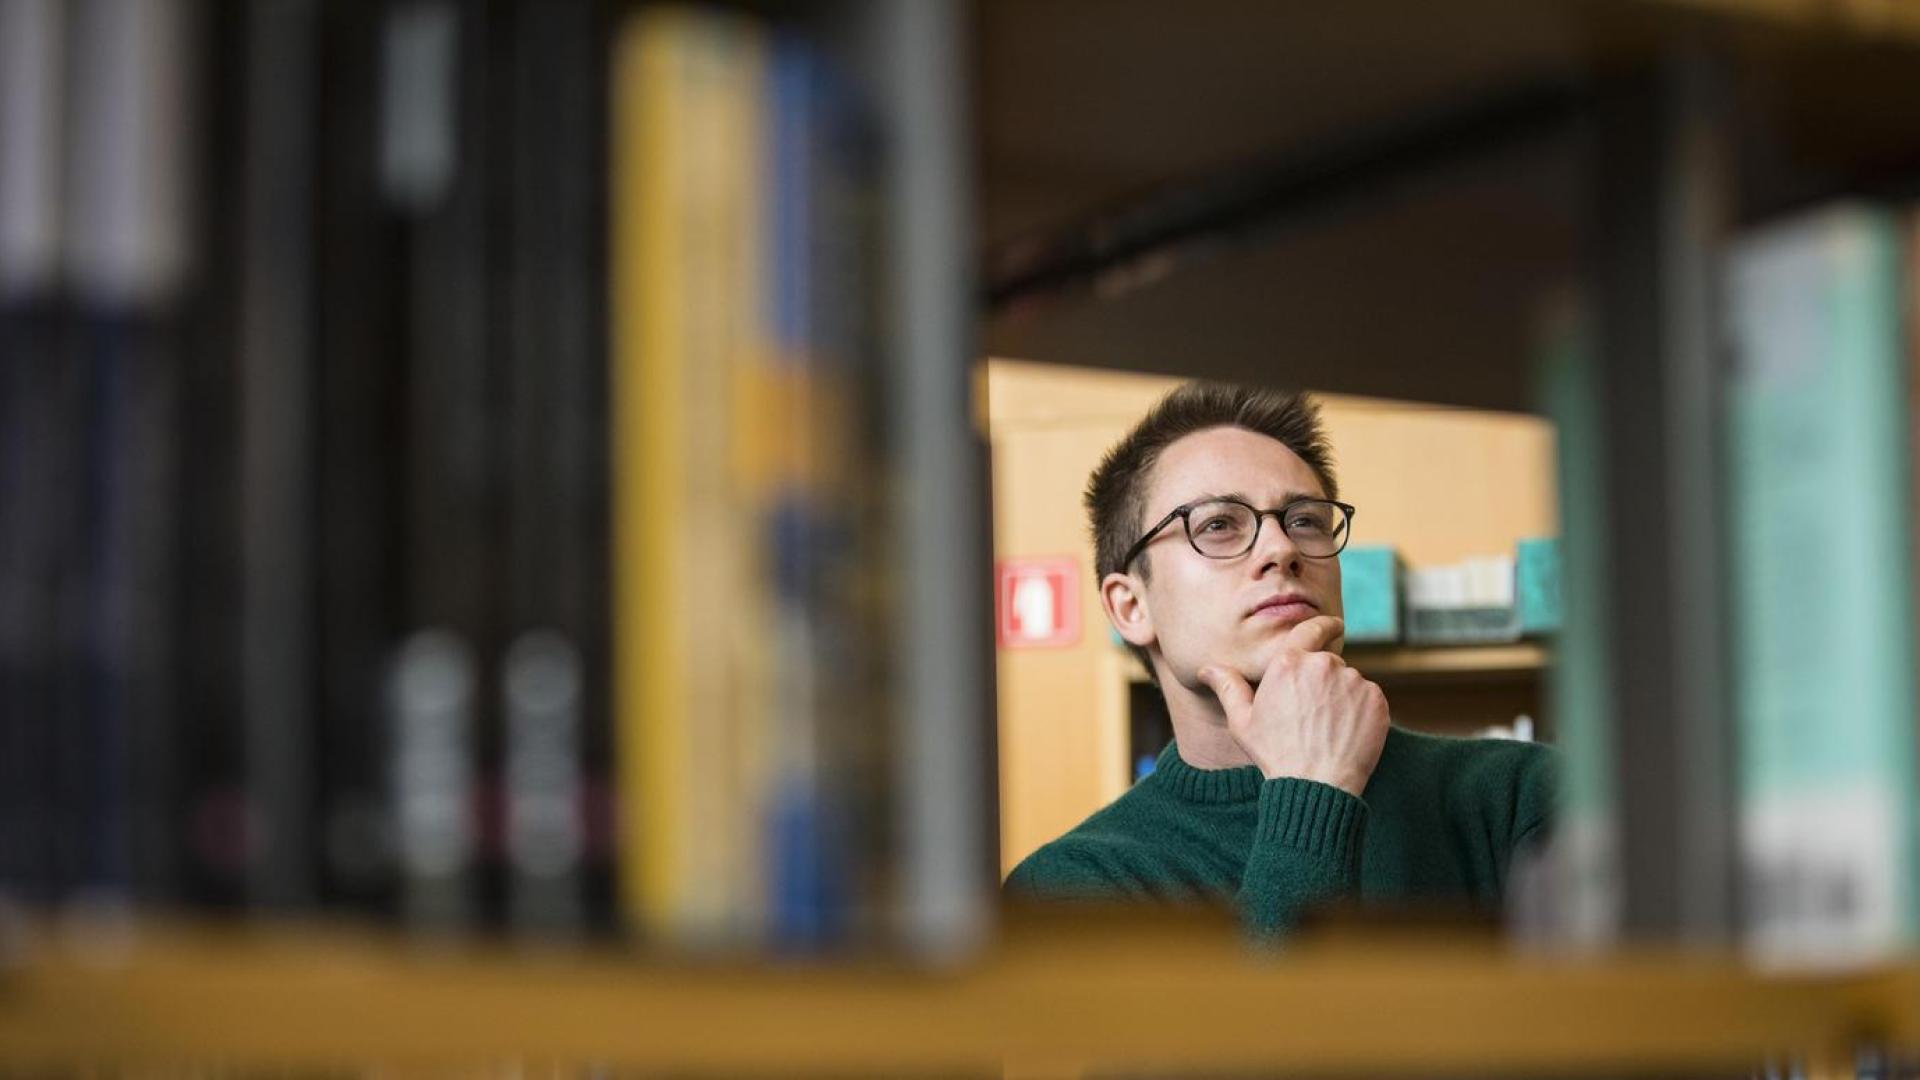 An individual wearing glasses and peering at a library shelf with their hand on their chin